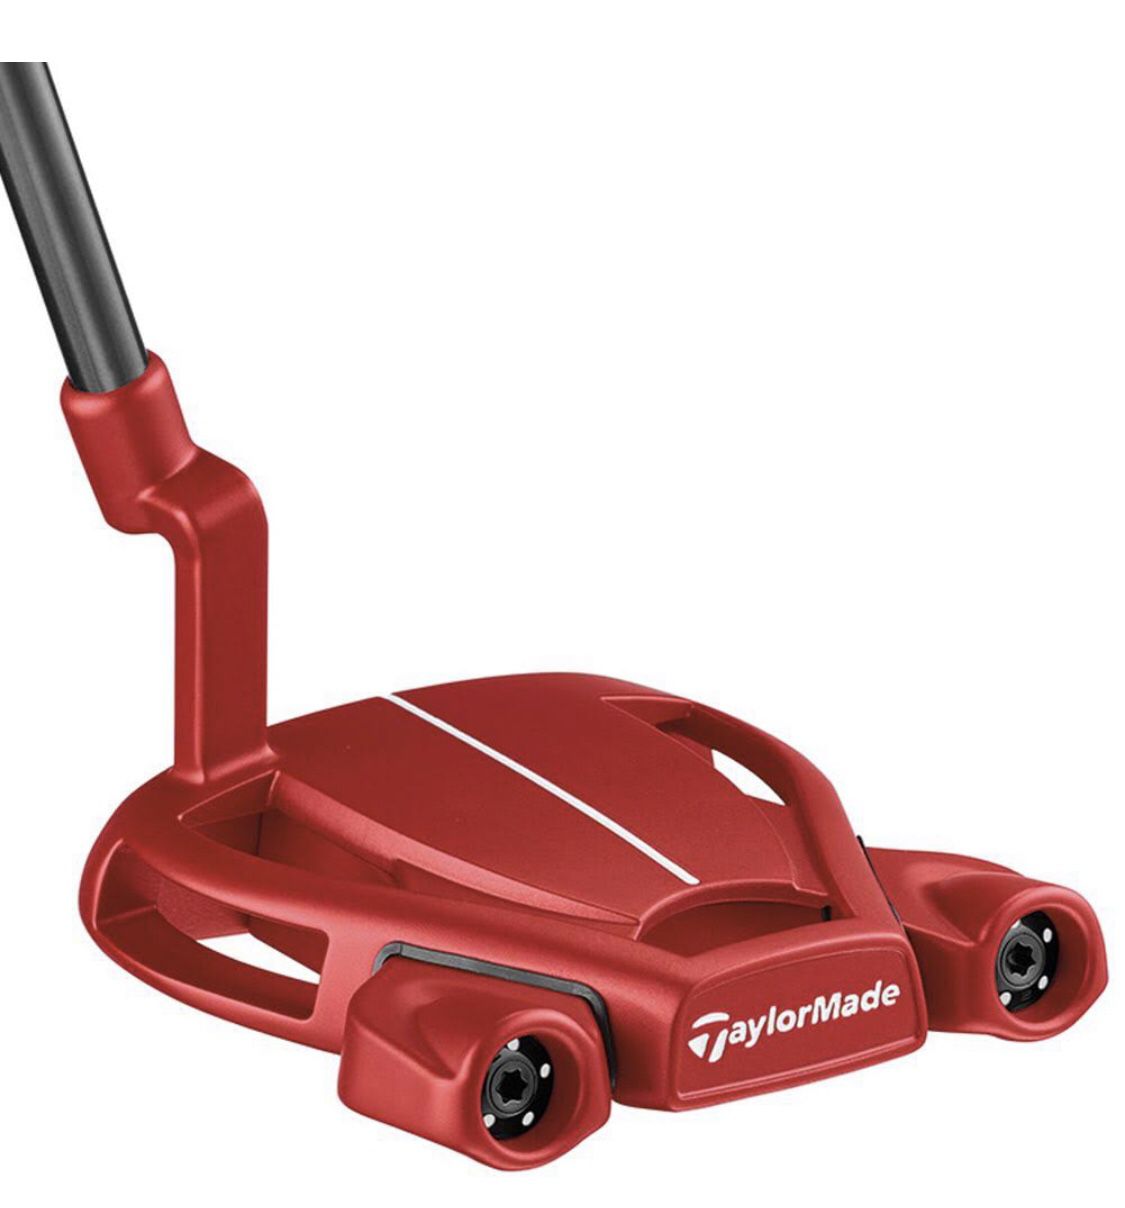 TaylorMade Tour Spider Putter